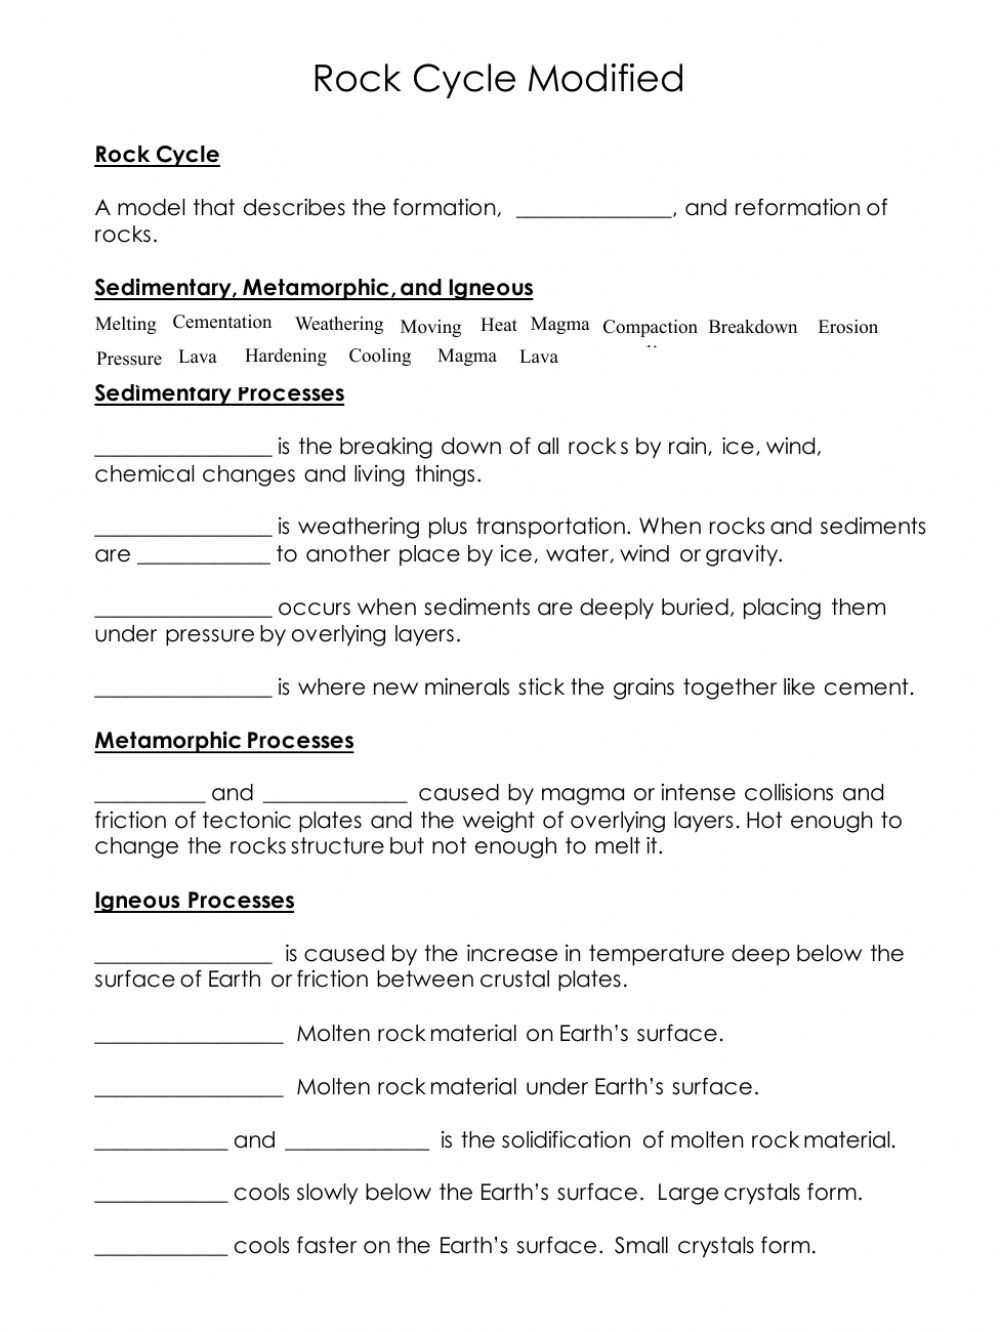 Rock Cycle Worksheet Answers Rock Cycle Notes Interactive Worksheet